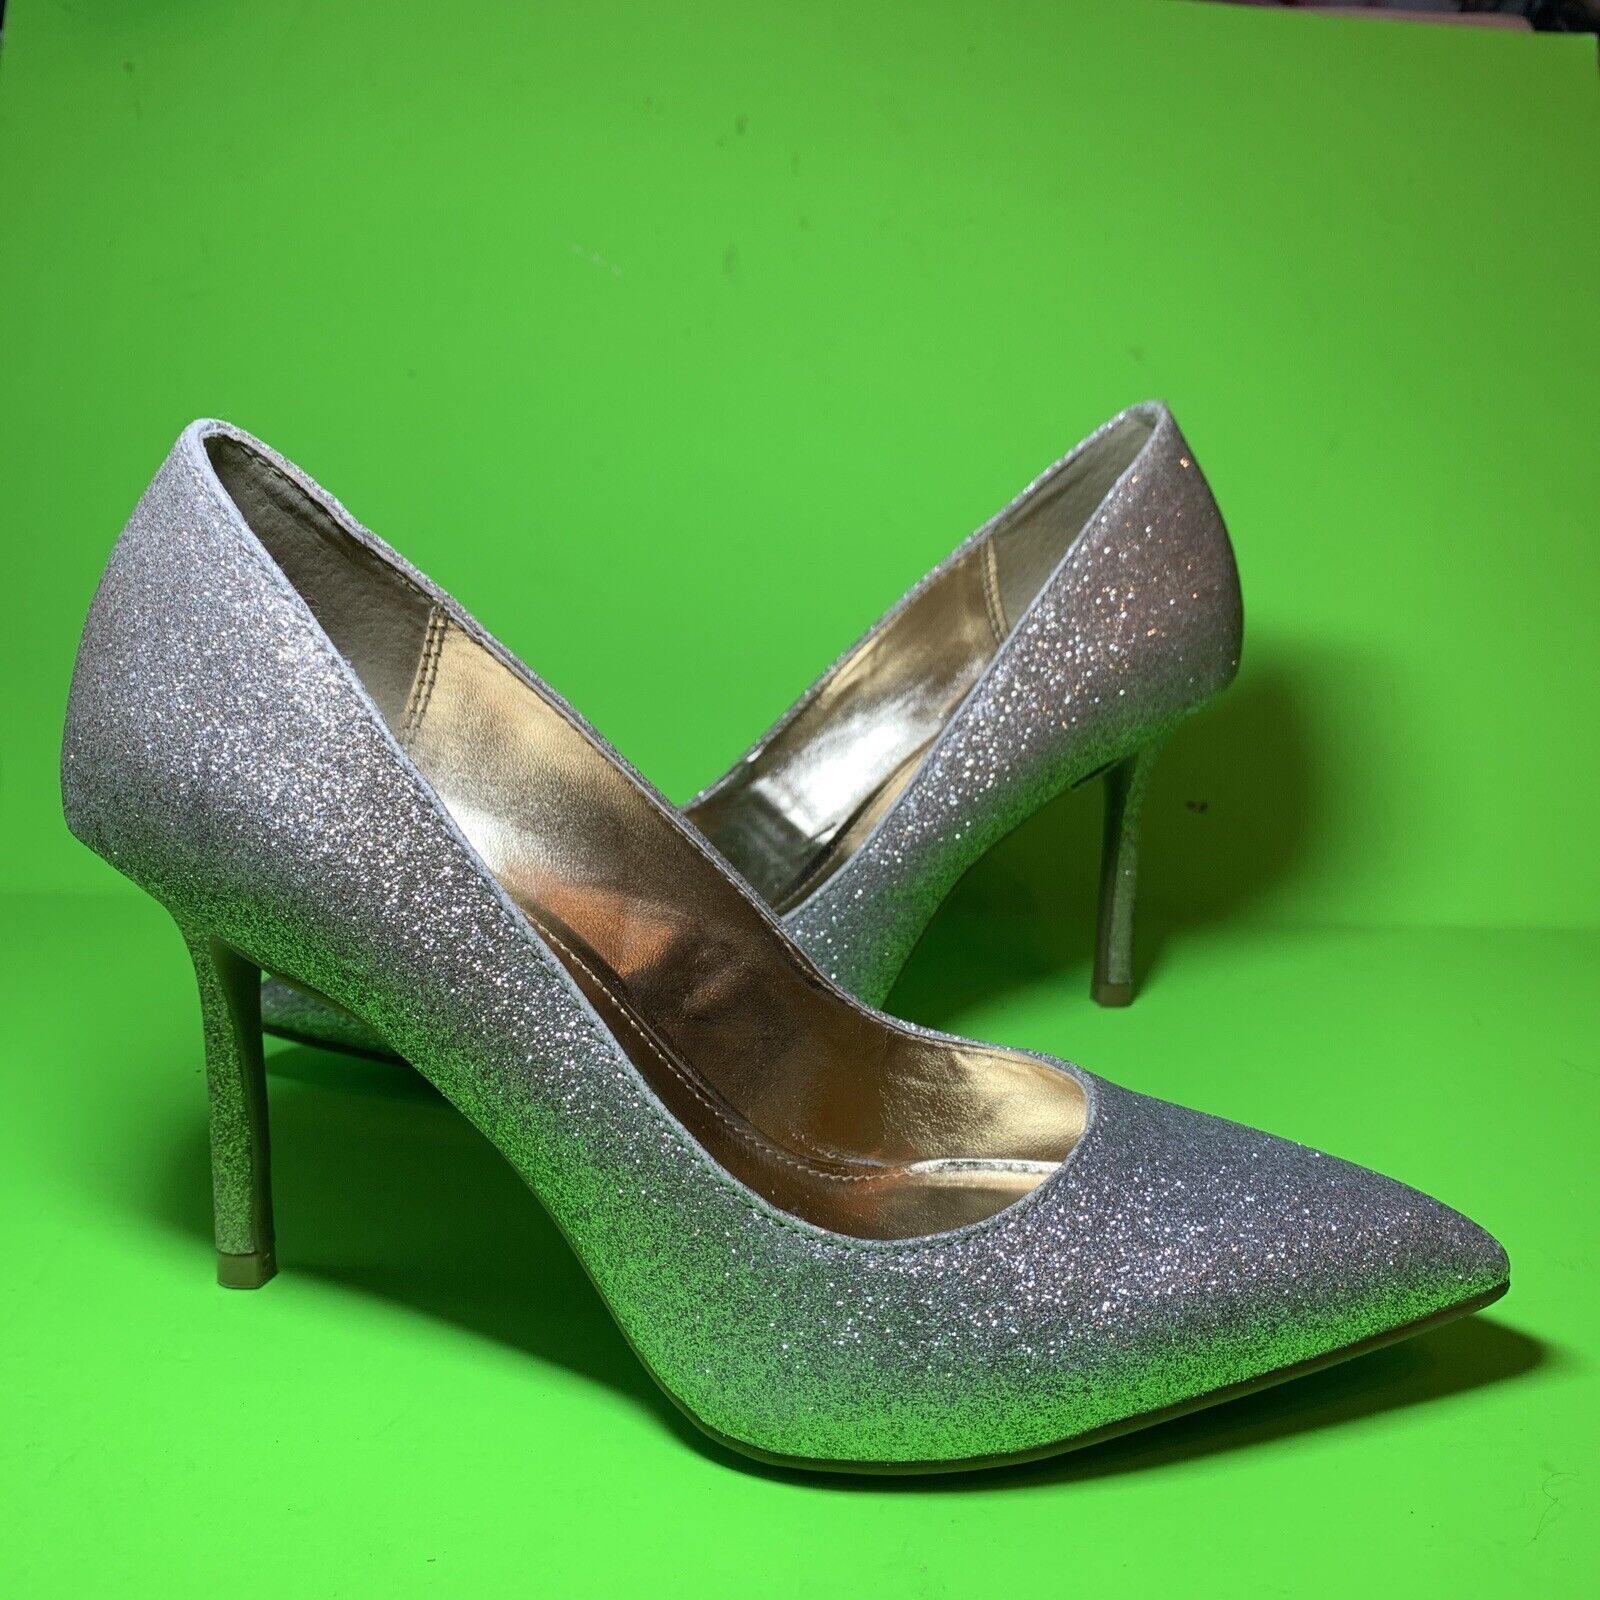 Katy Perry Women\'s The Sissy Pump - Silver Glitter Size 6 m Heels Used J